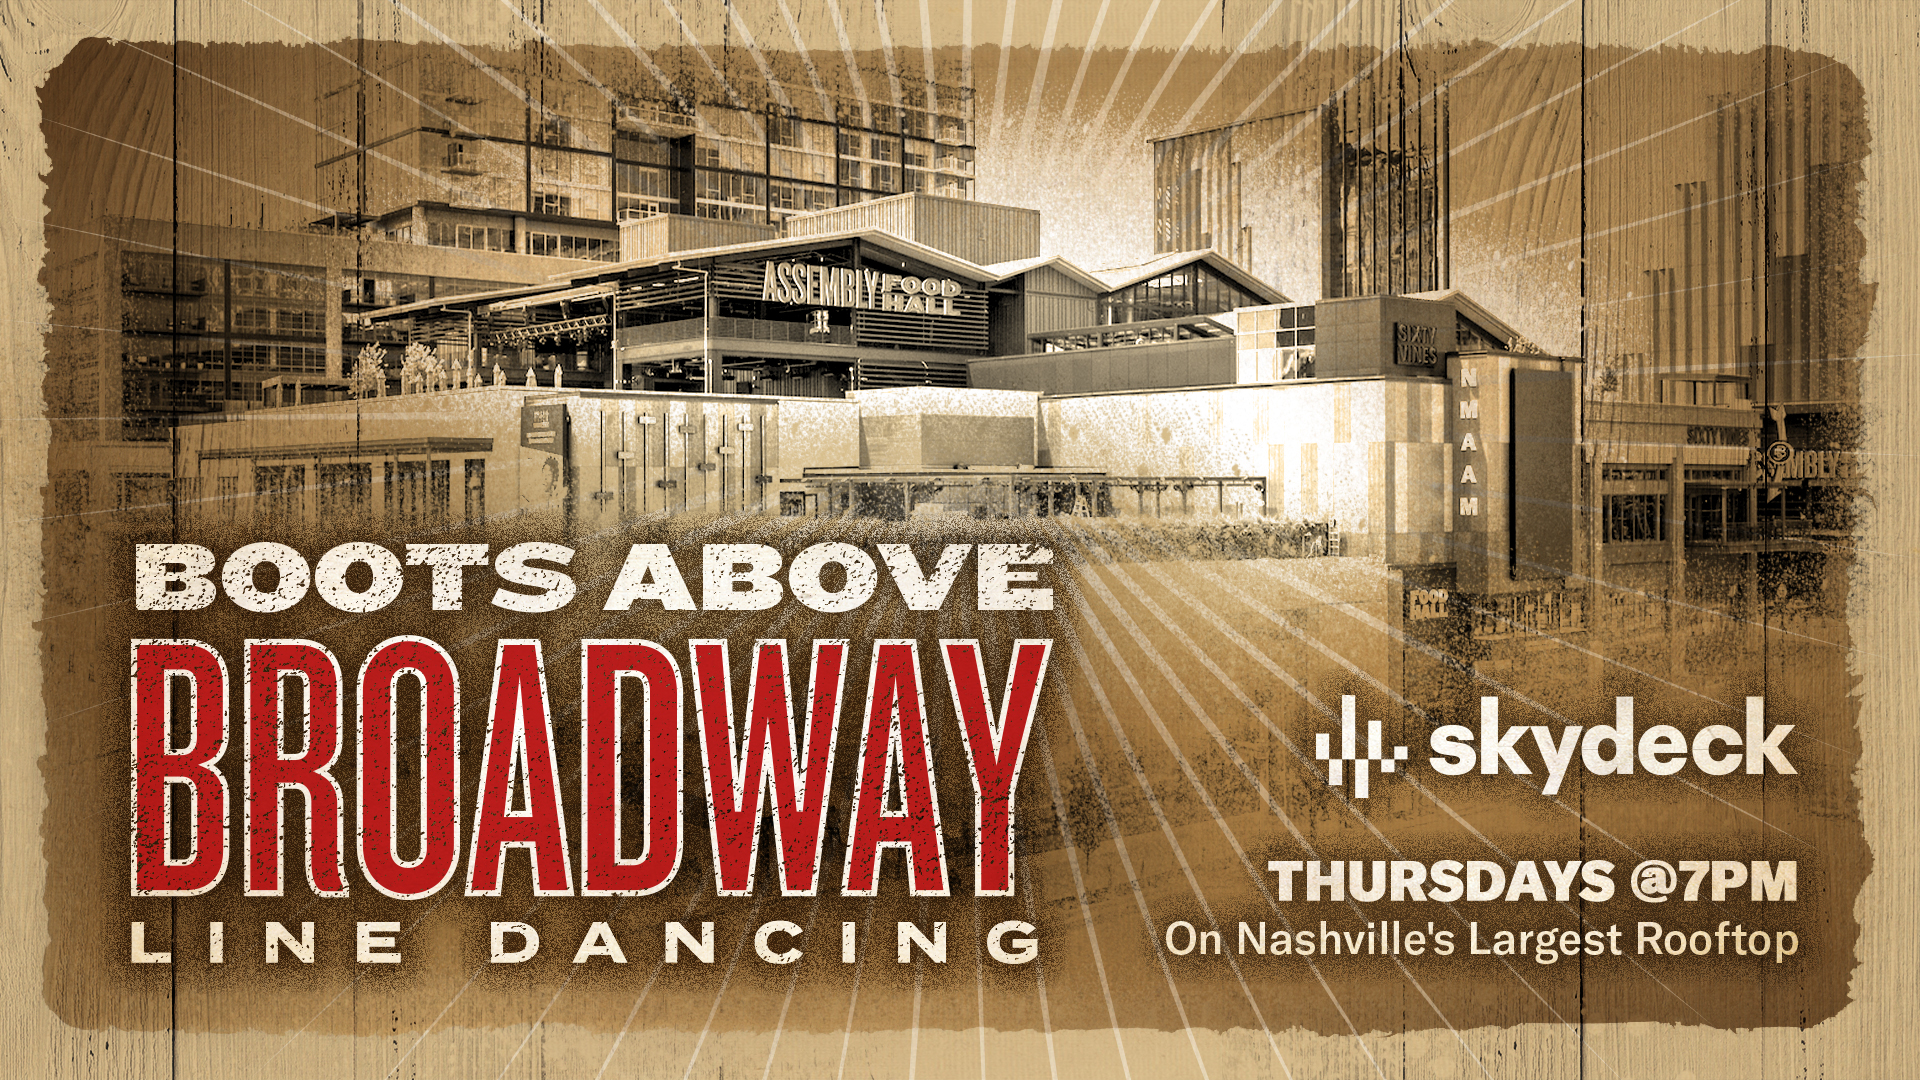 Promo image of Boots Above Broadway Line Dancing